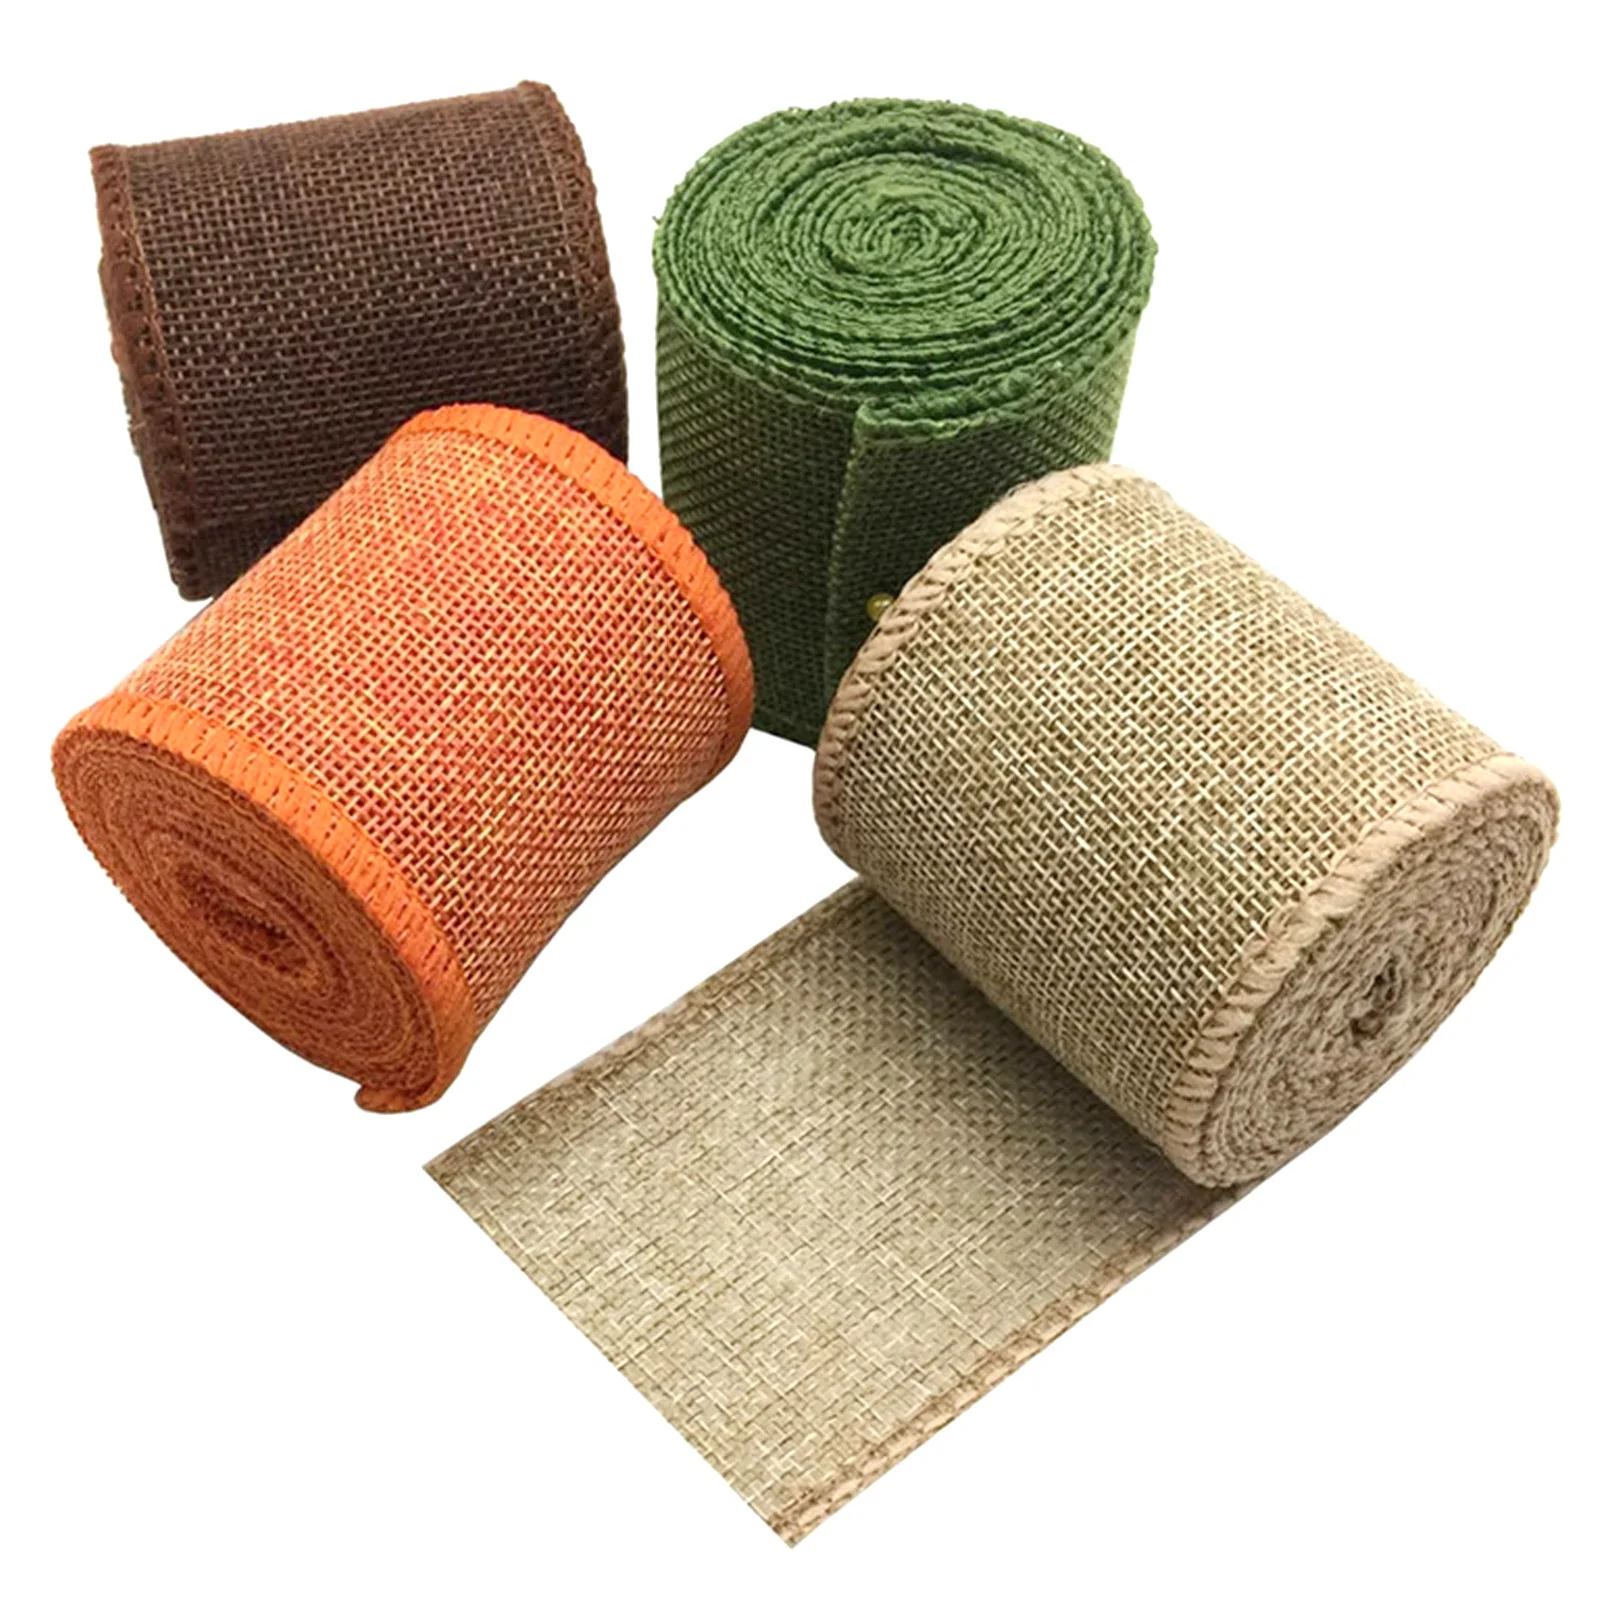 

4 Rolls 2 Inch Wide 3 Yards Long Rustic Burlap Ribbon Fabric Craft Wrapping for Christmas Wedding Gift Wreath DIY Projects Decor